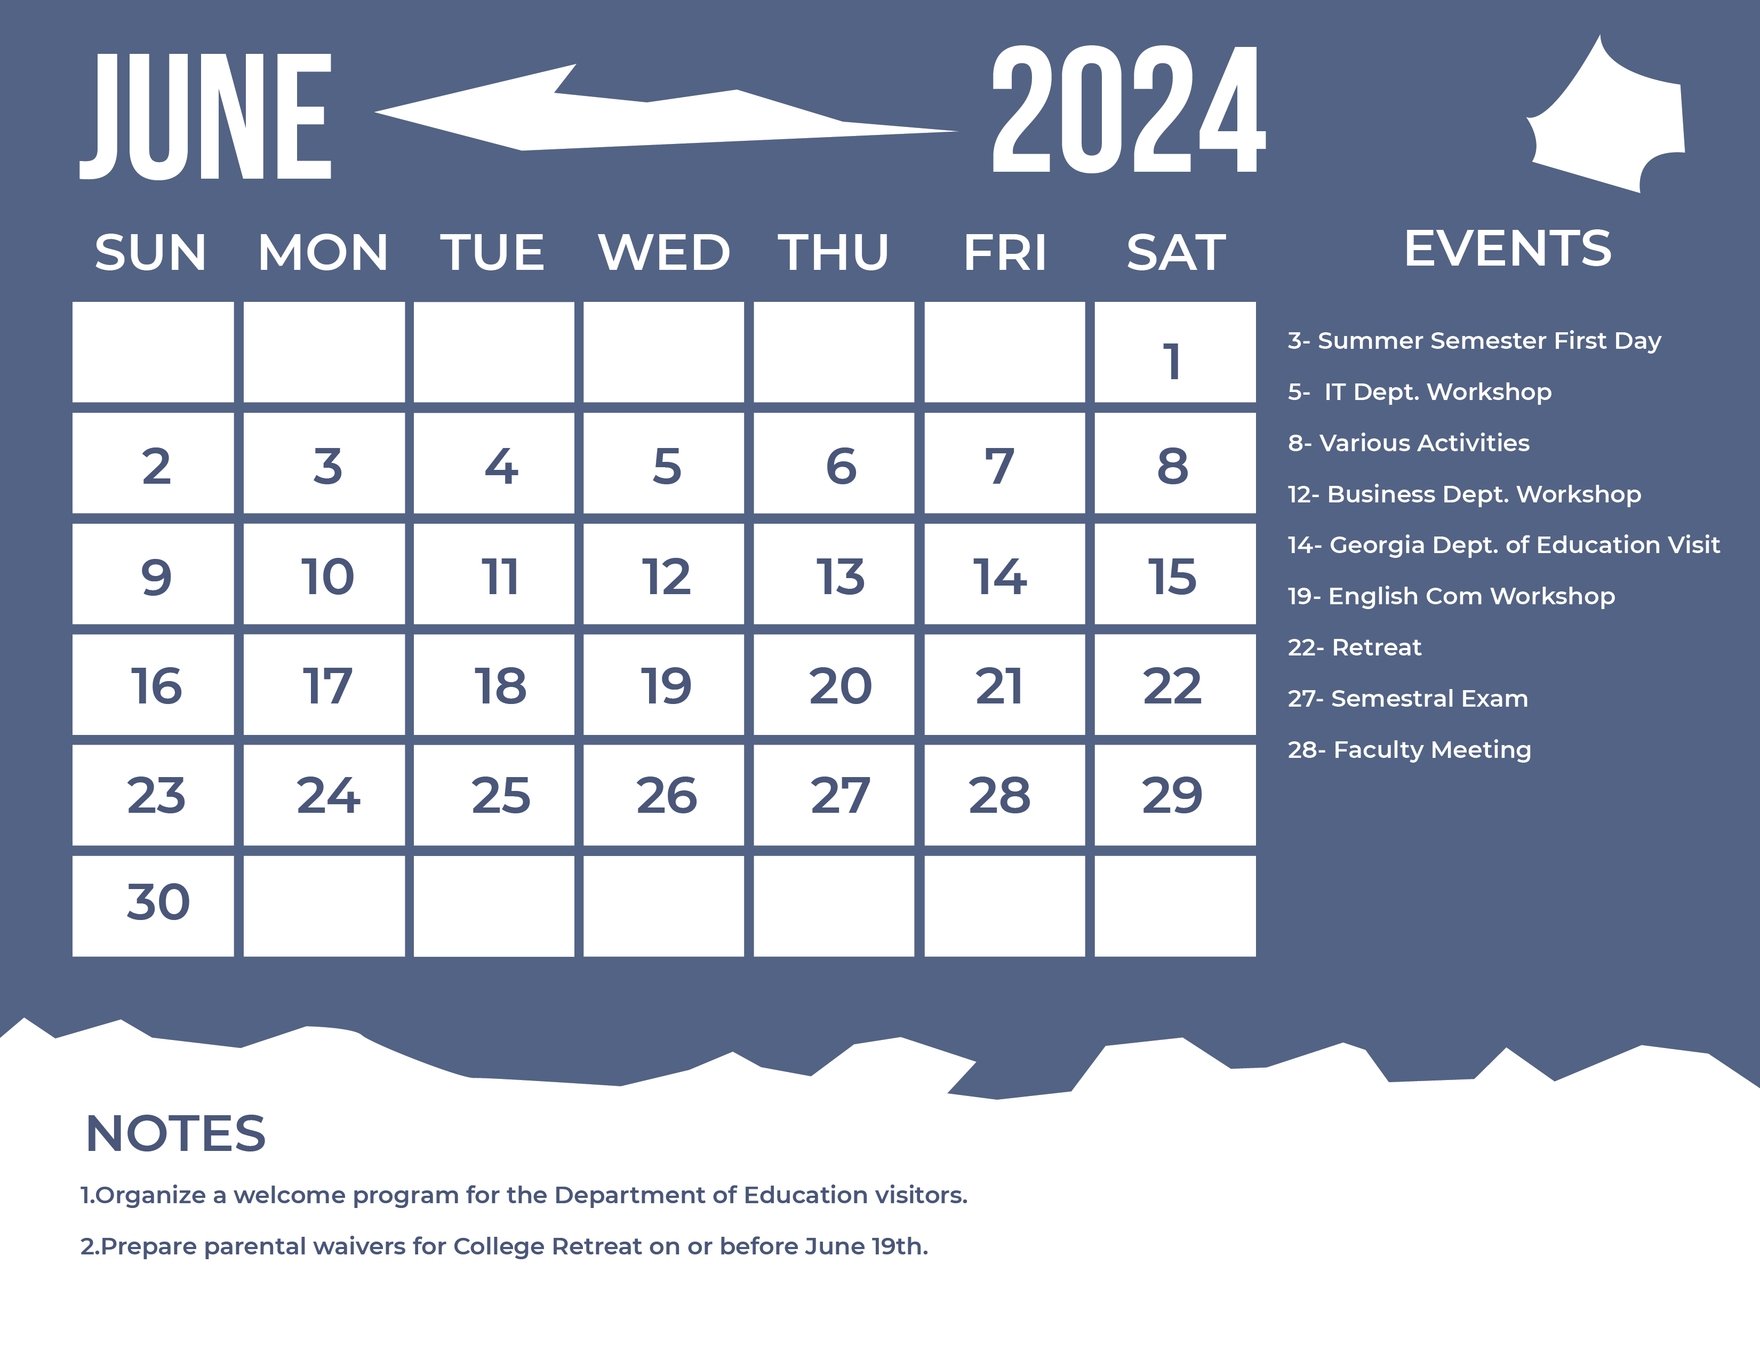 Free Pretty May 2024 Calendar Download in Word, Illustrator, EPS, SVG